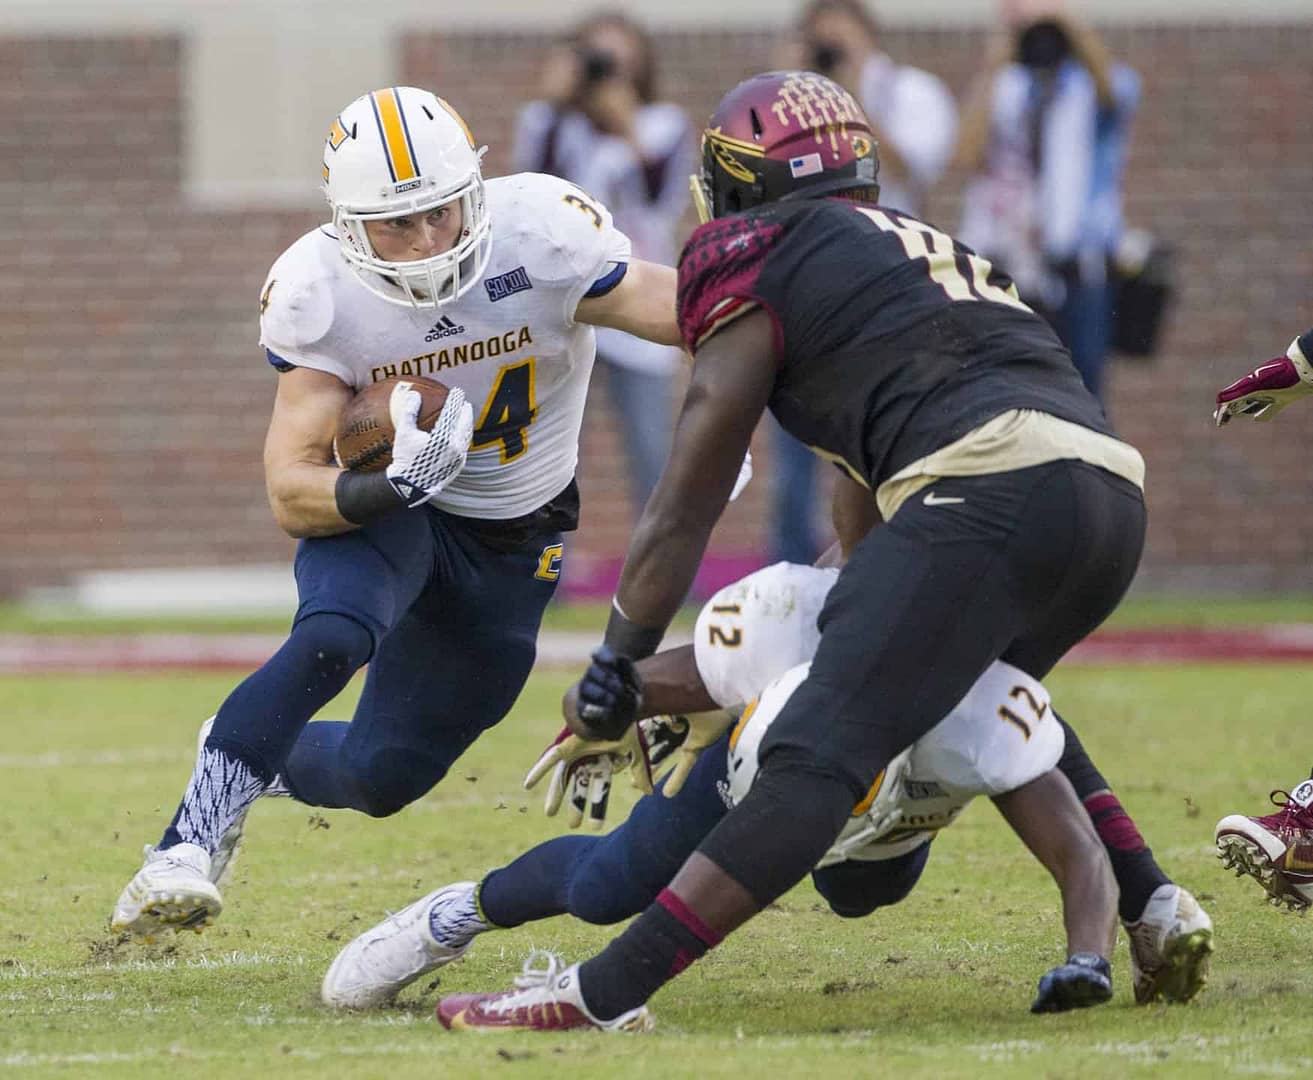 chattanooga-vs-illinois-odds-prediction-undefeated-mocs-should-cover-but-face-toughest-challenge-yet-september-22-2022